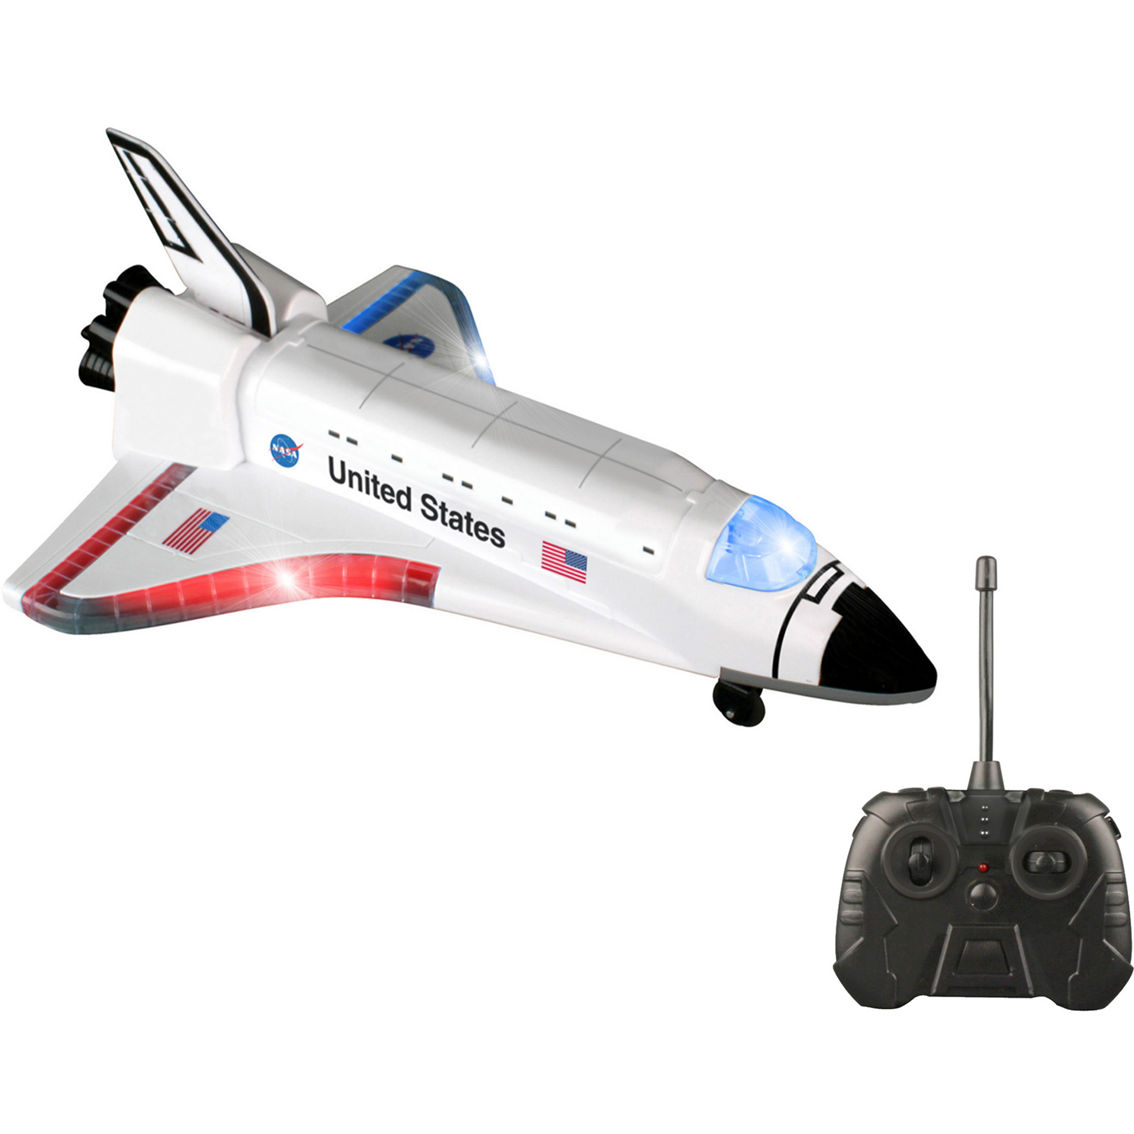 Daron NASA: Space Adventure Radio Controlled Space Shuttle - Image 2 of 4